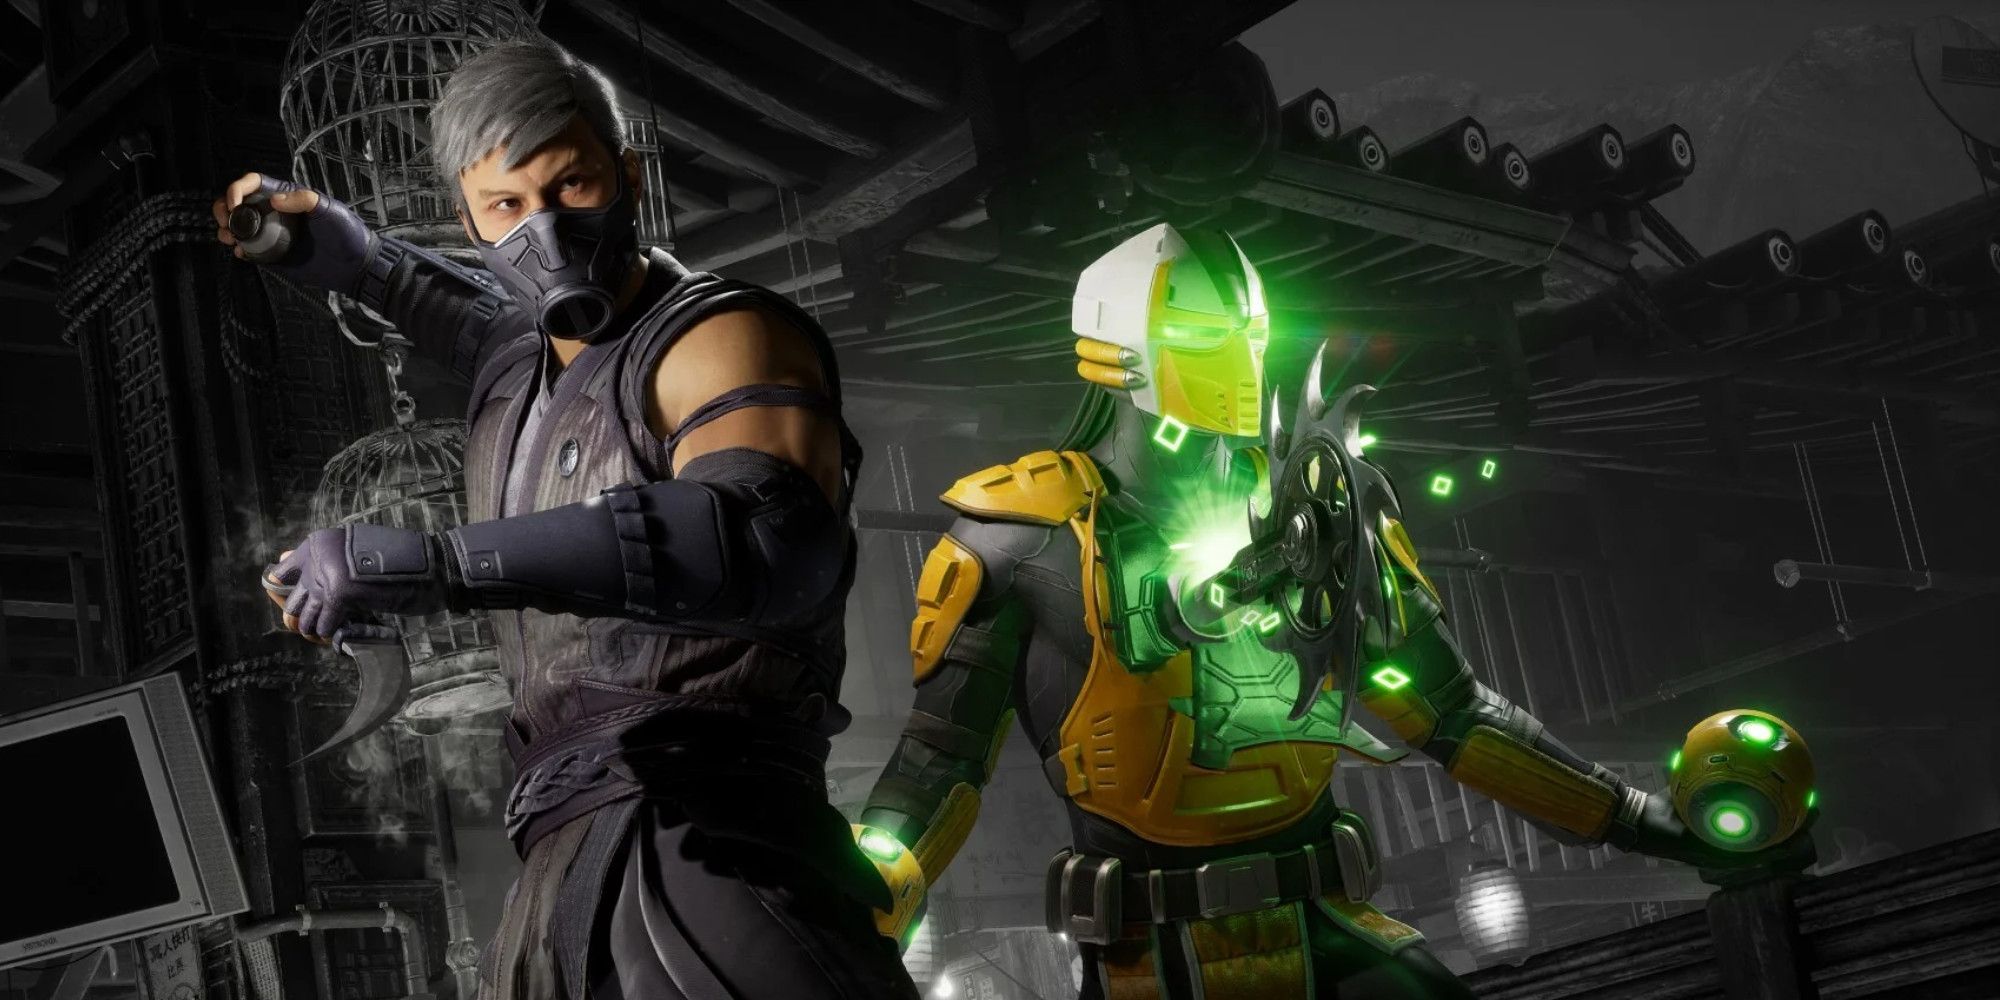 Mortal Kombat 1 will not feature cross-play at launch